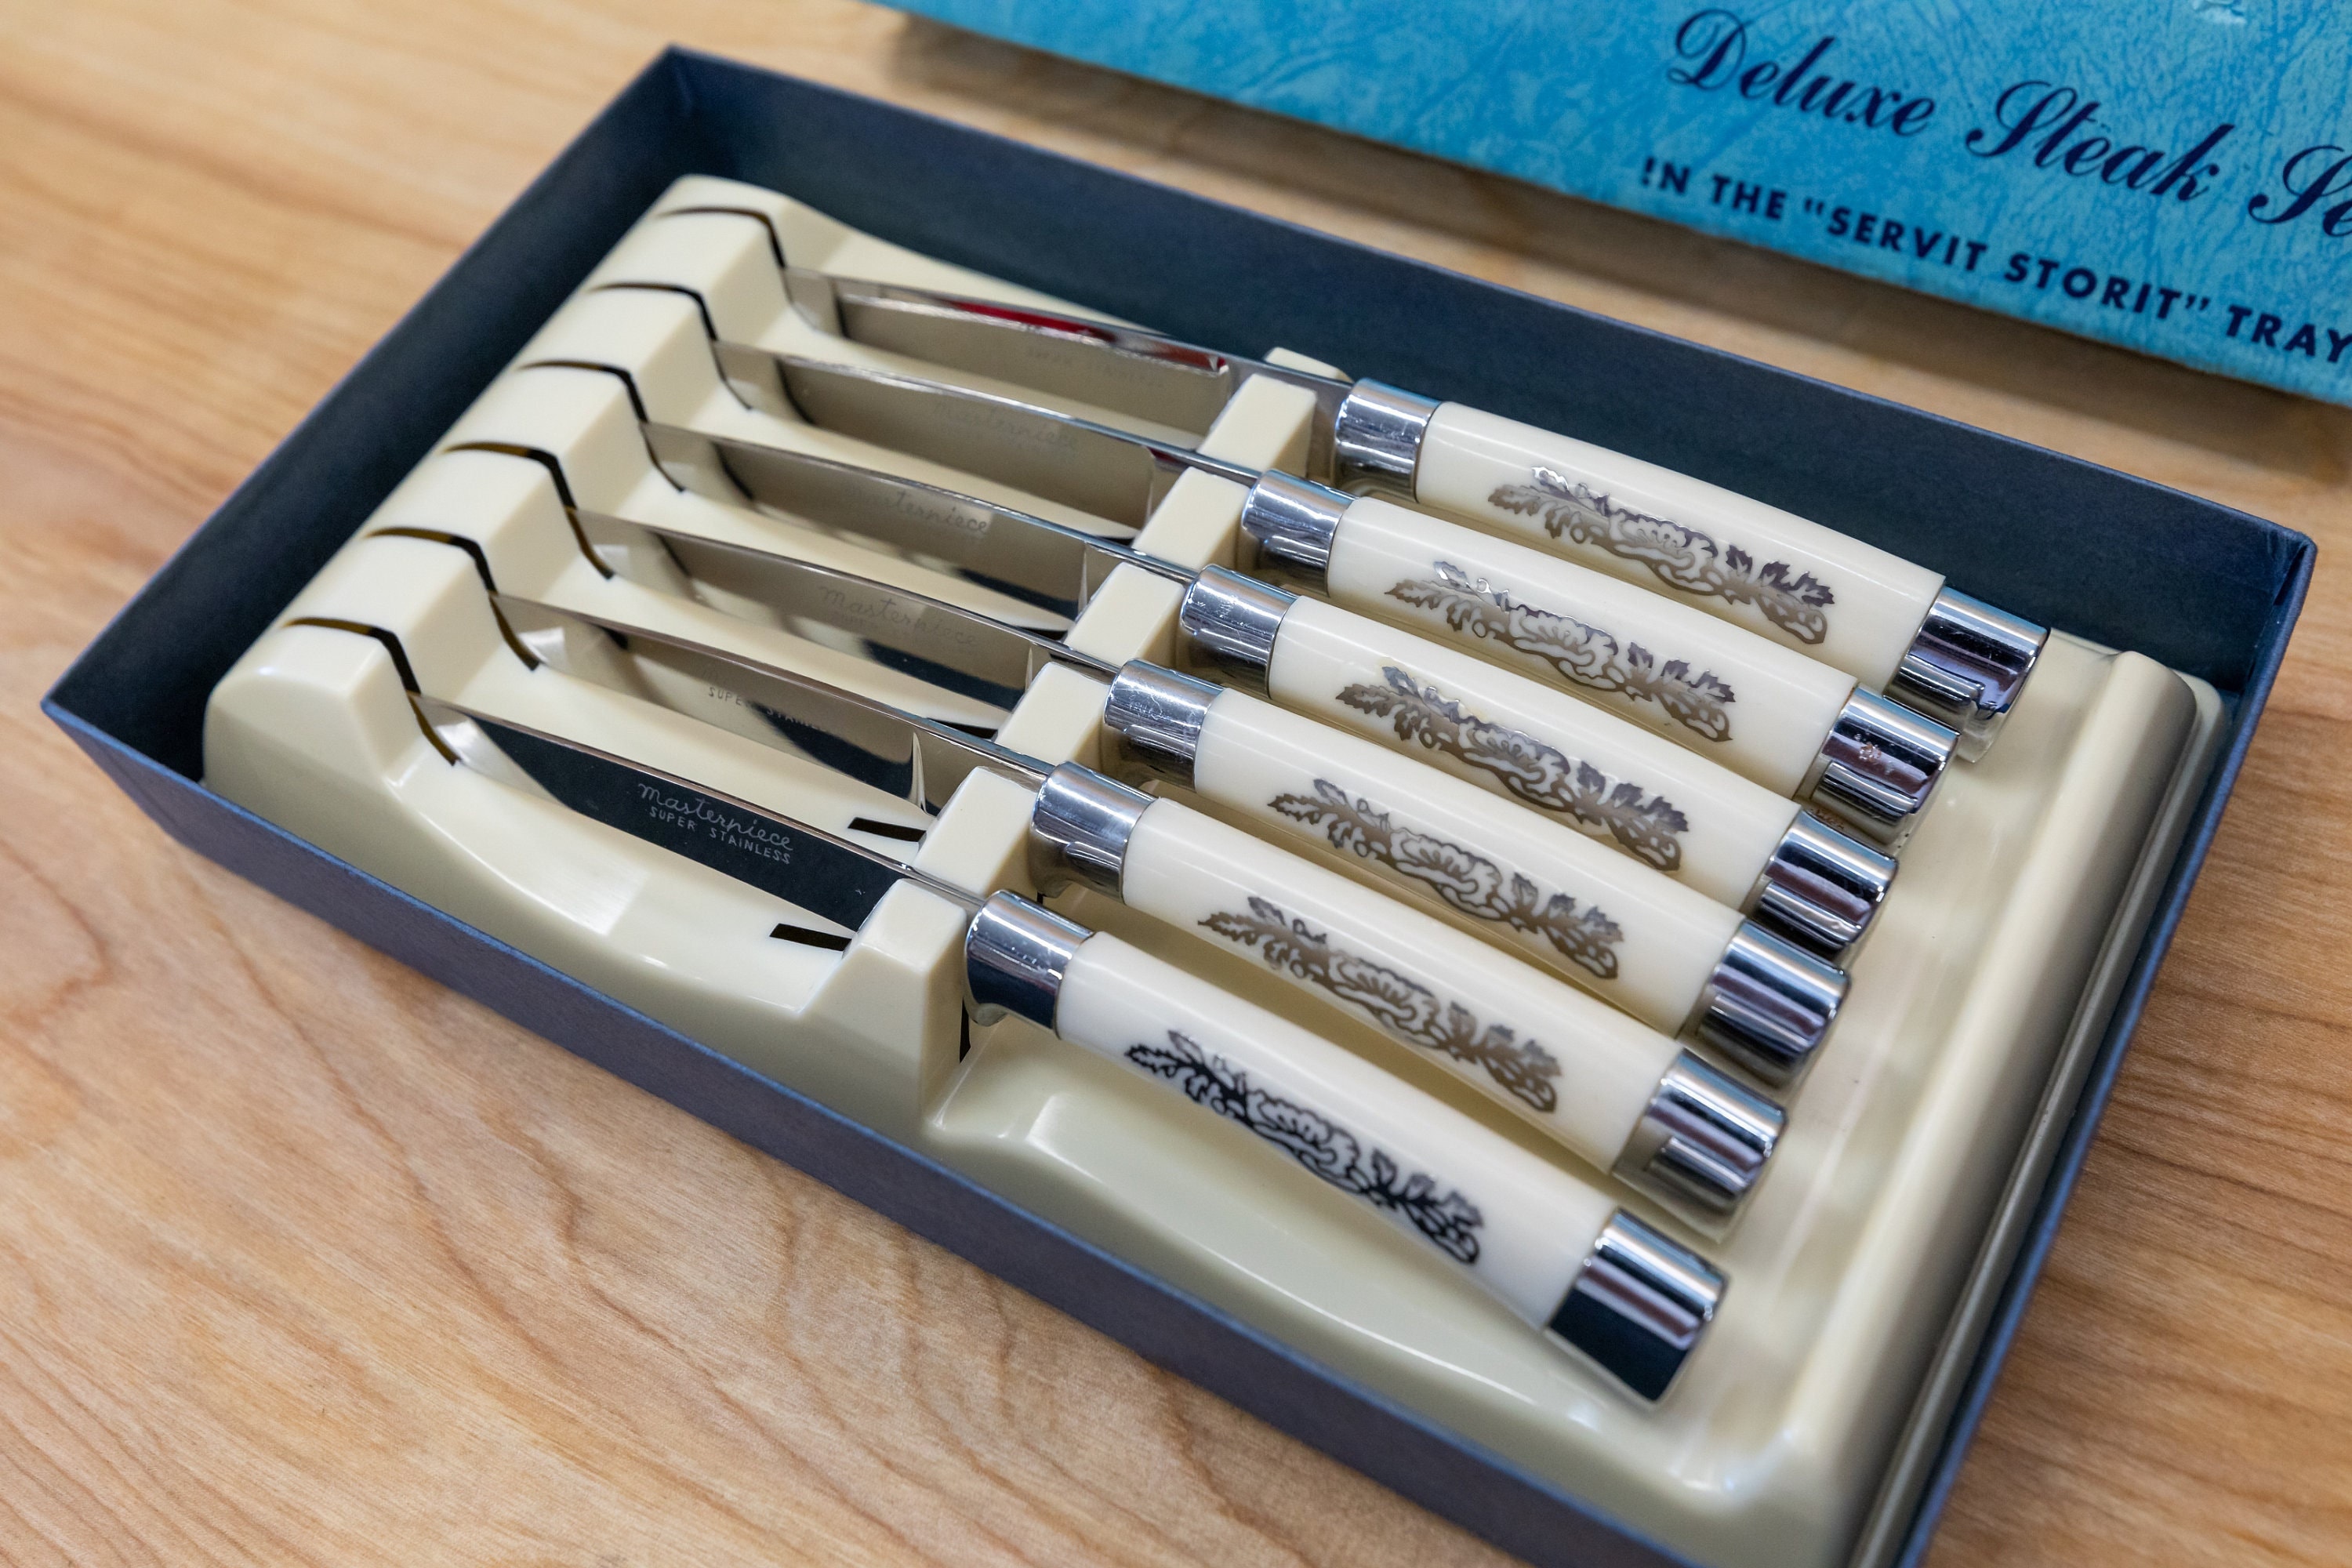 Steak Knives Stainless Steel Set of 6 Melamine Handles Vintage Empire Steak  Knives with Cutlery Tray Mid Century Gift Idea,Made in USA